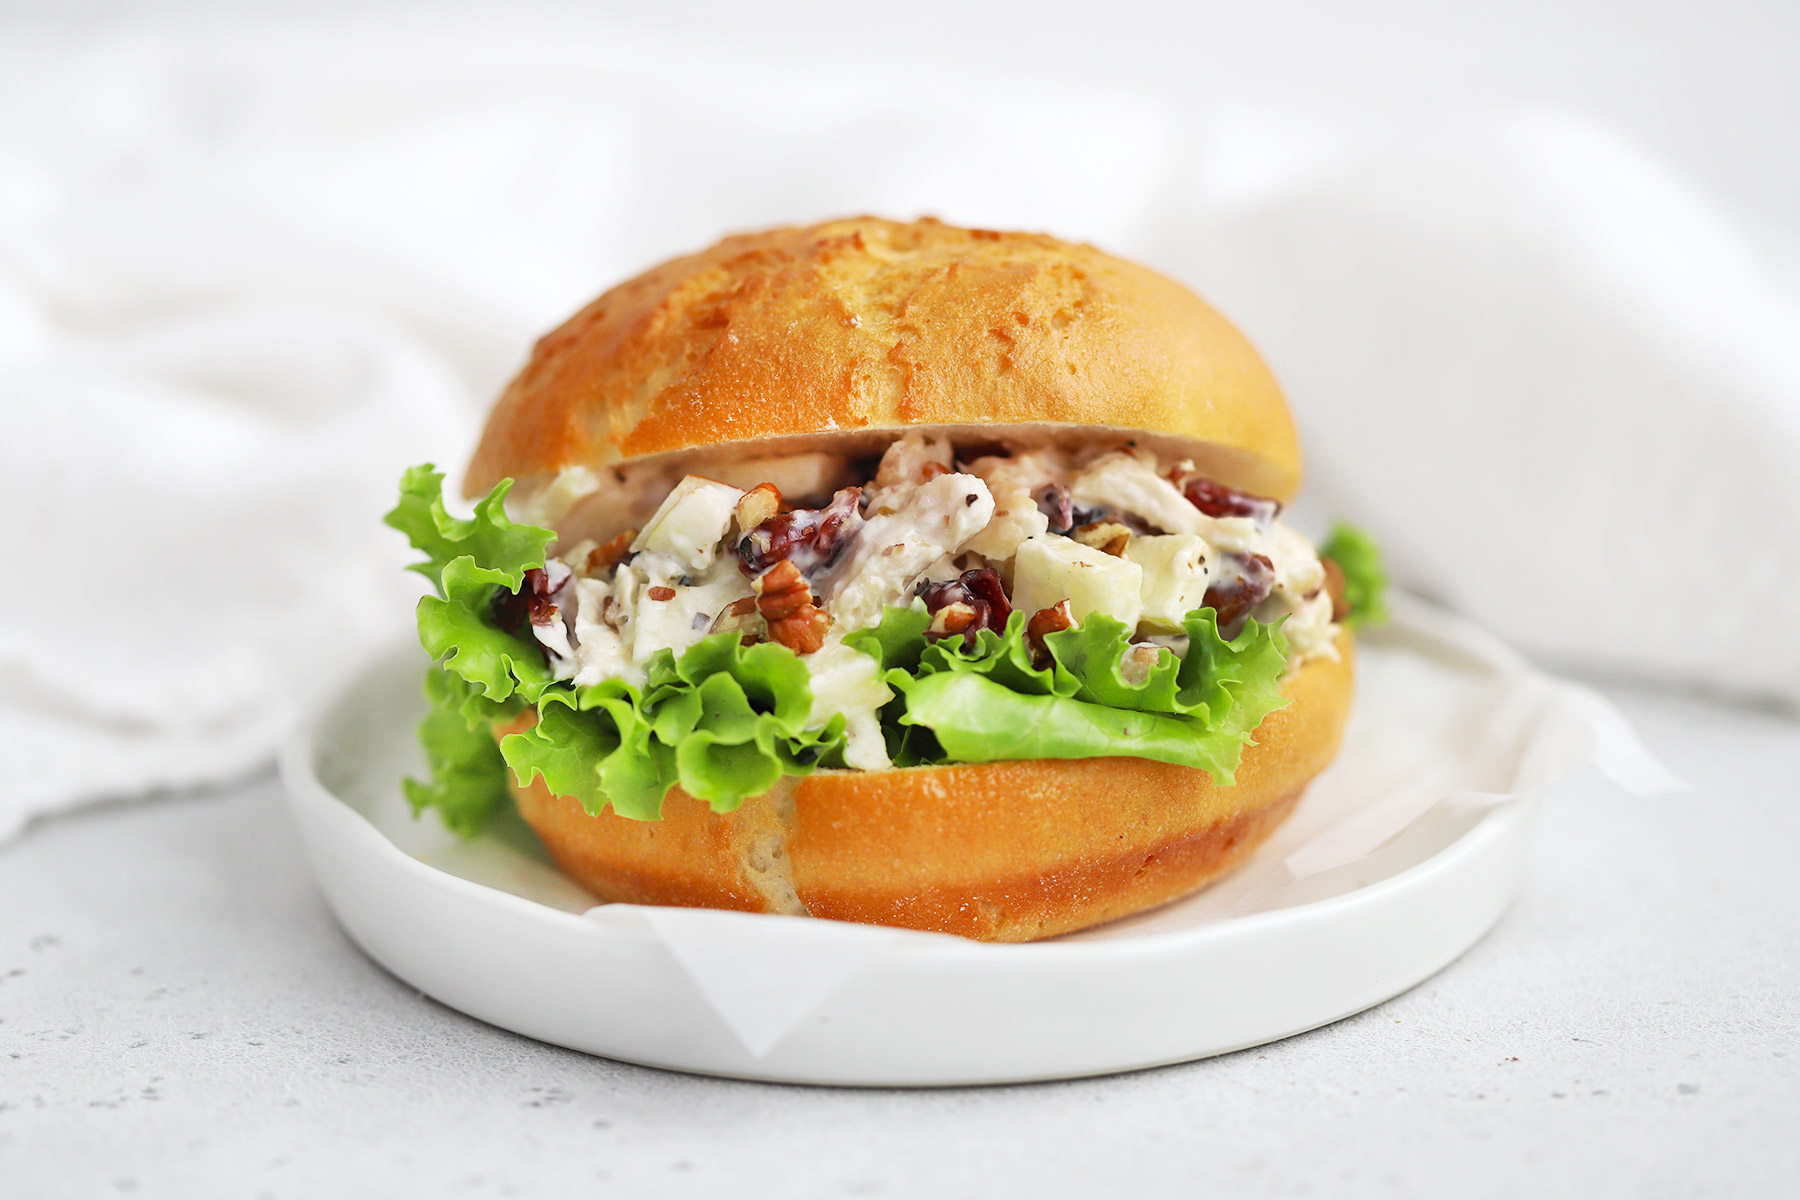 Front view of an apple cranberry chicken salad sandwich made with a gluten-free bun on a white plate.